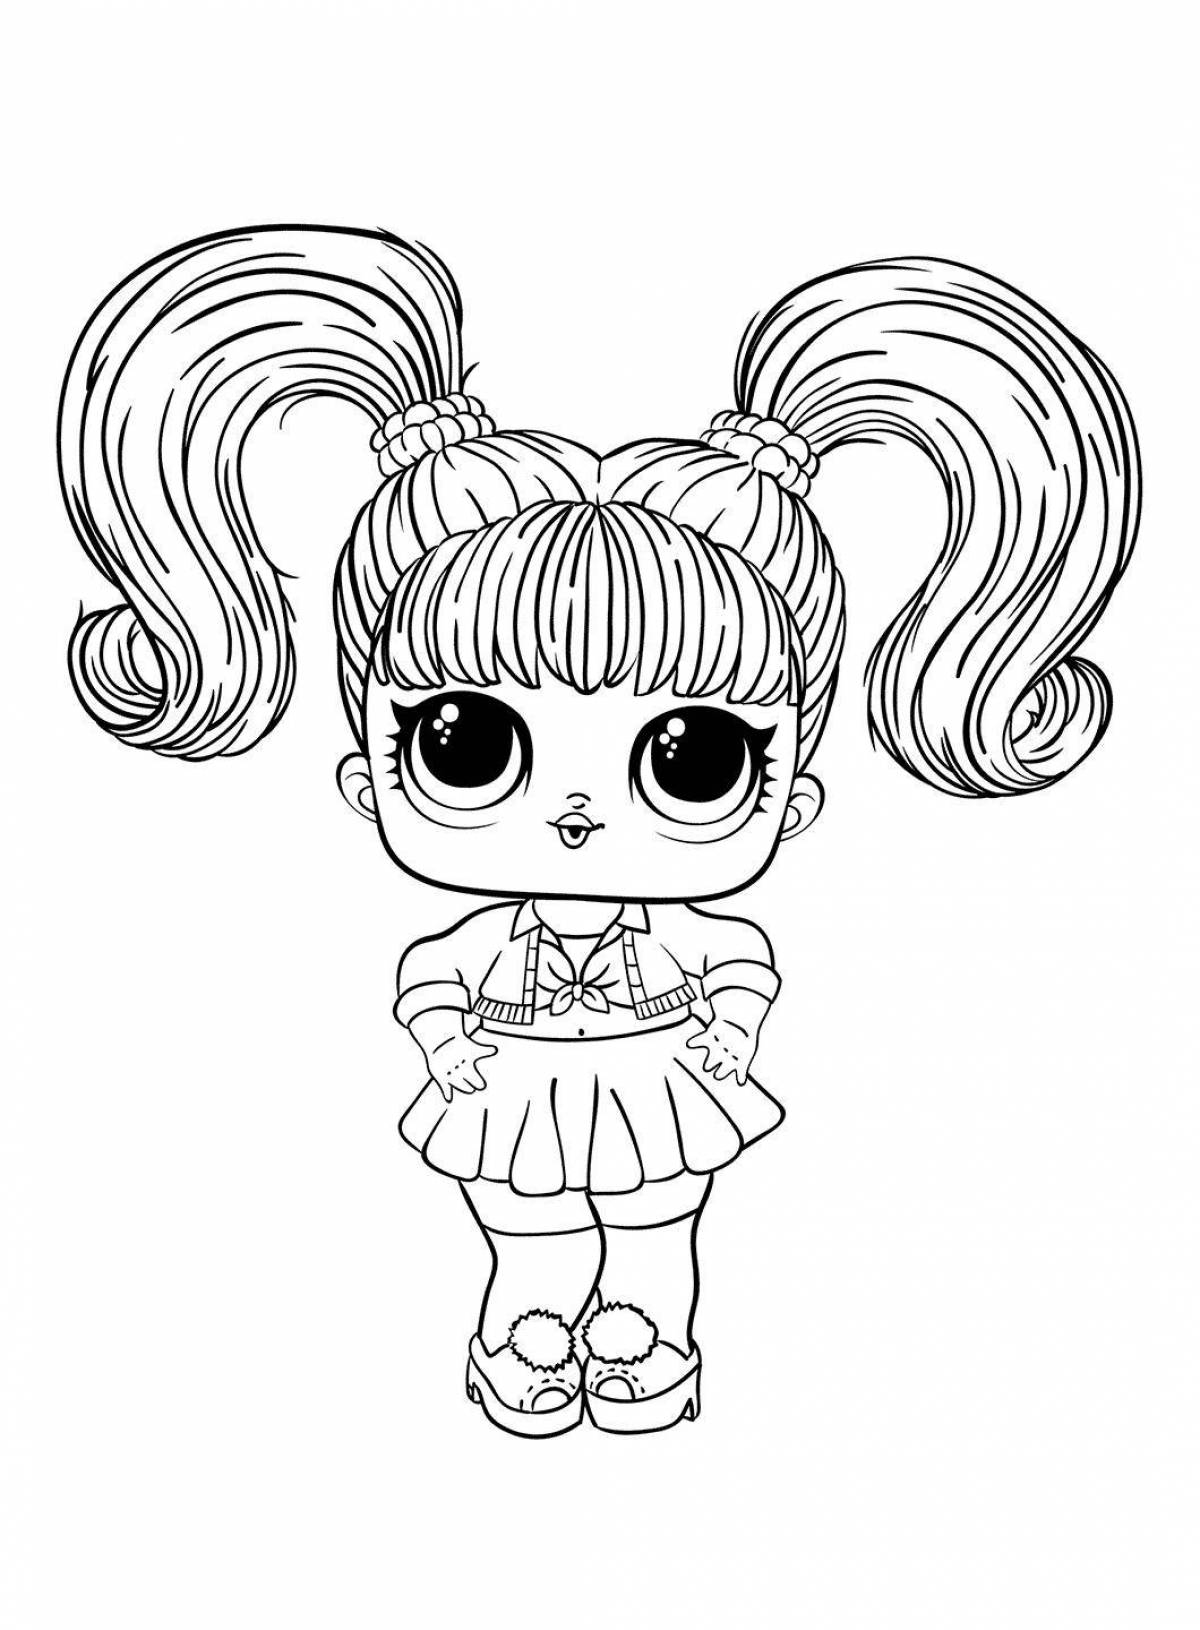 Snuggly coloring page baby dolls